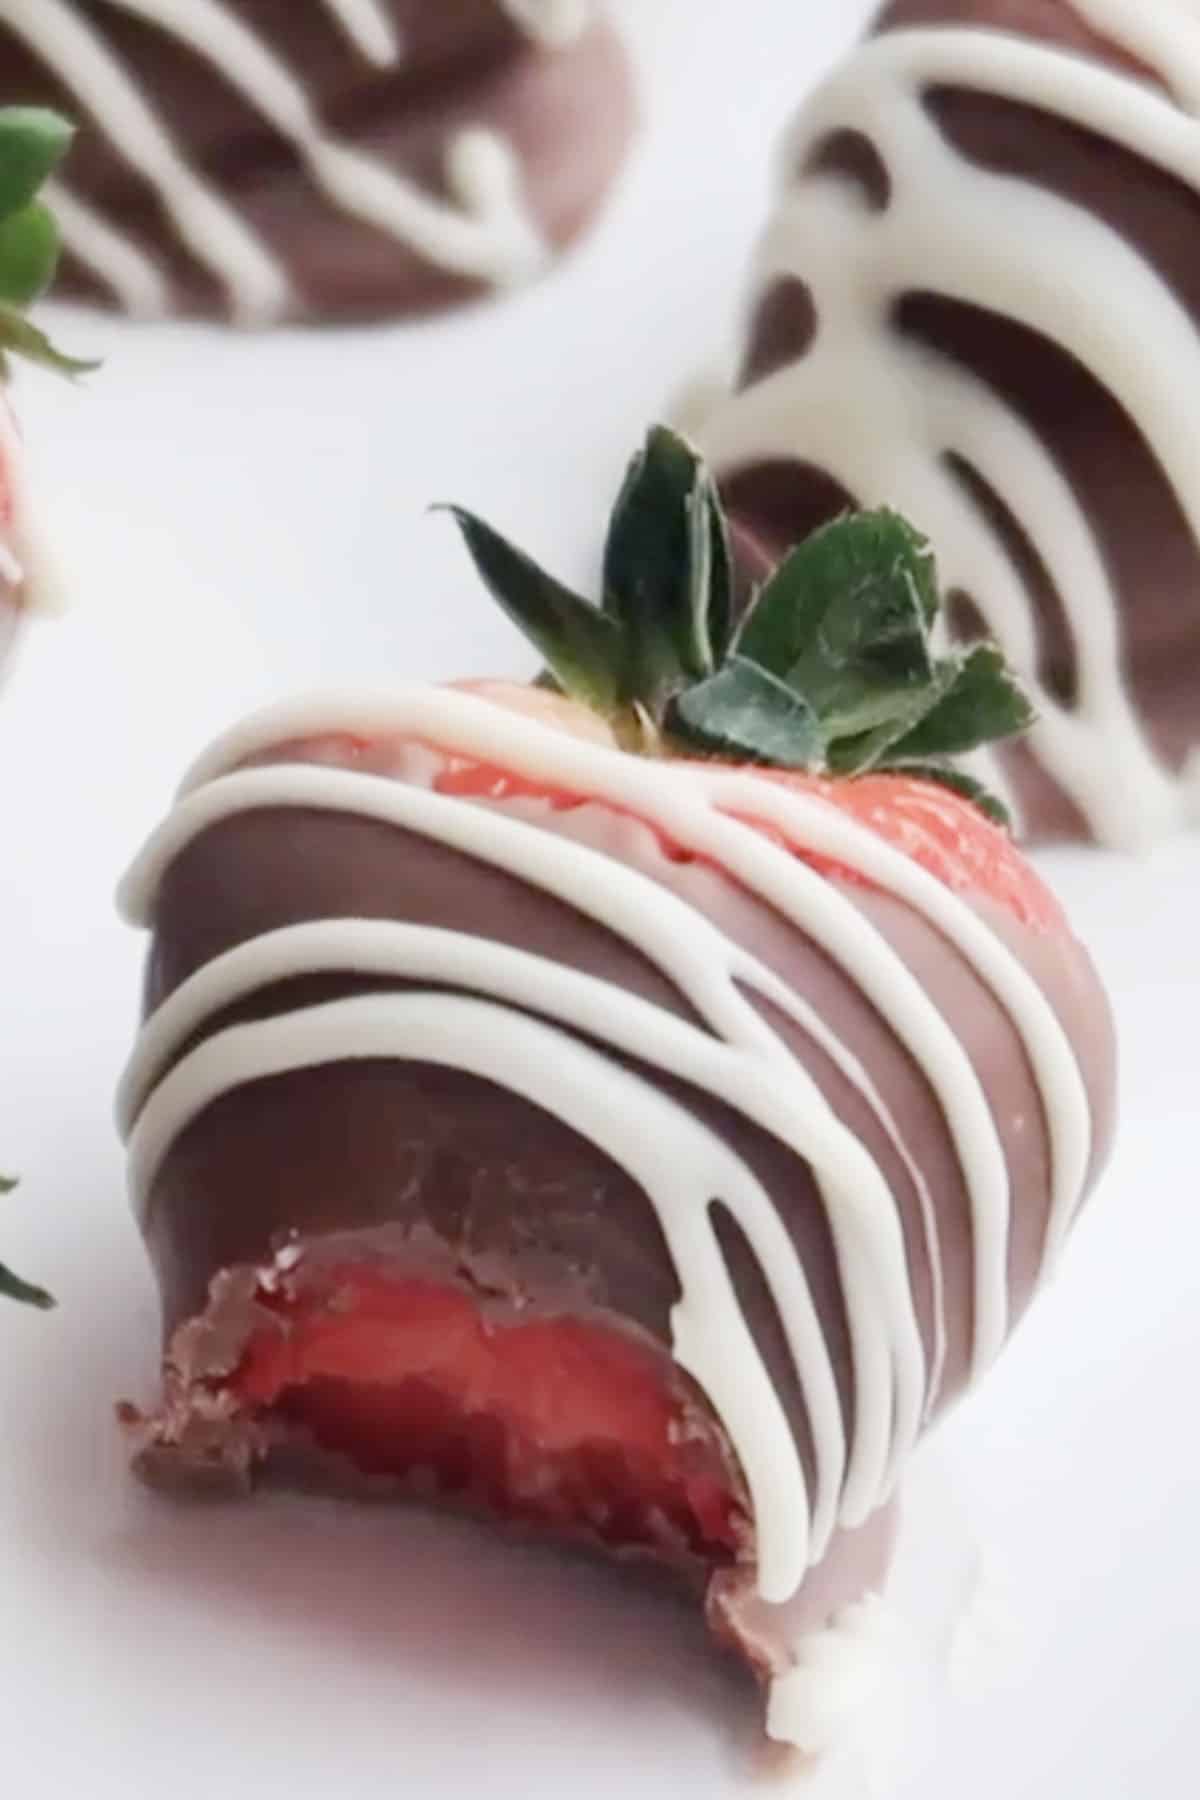 DIY chocolate dipped strawberry with a bite take out